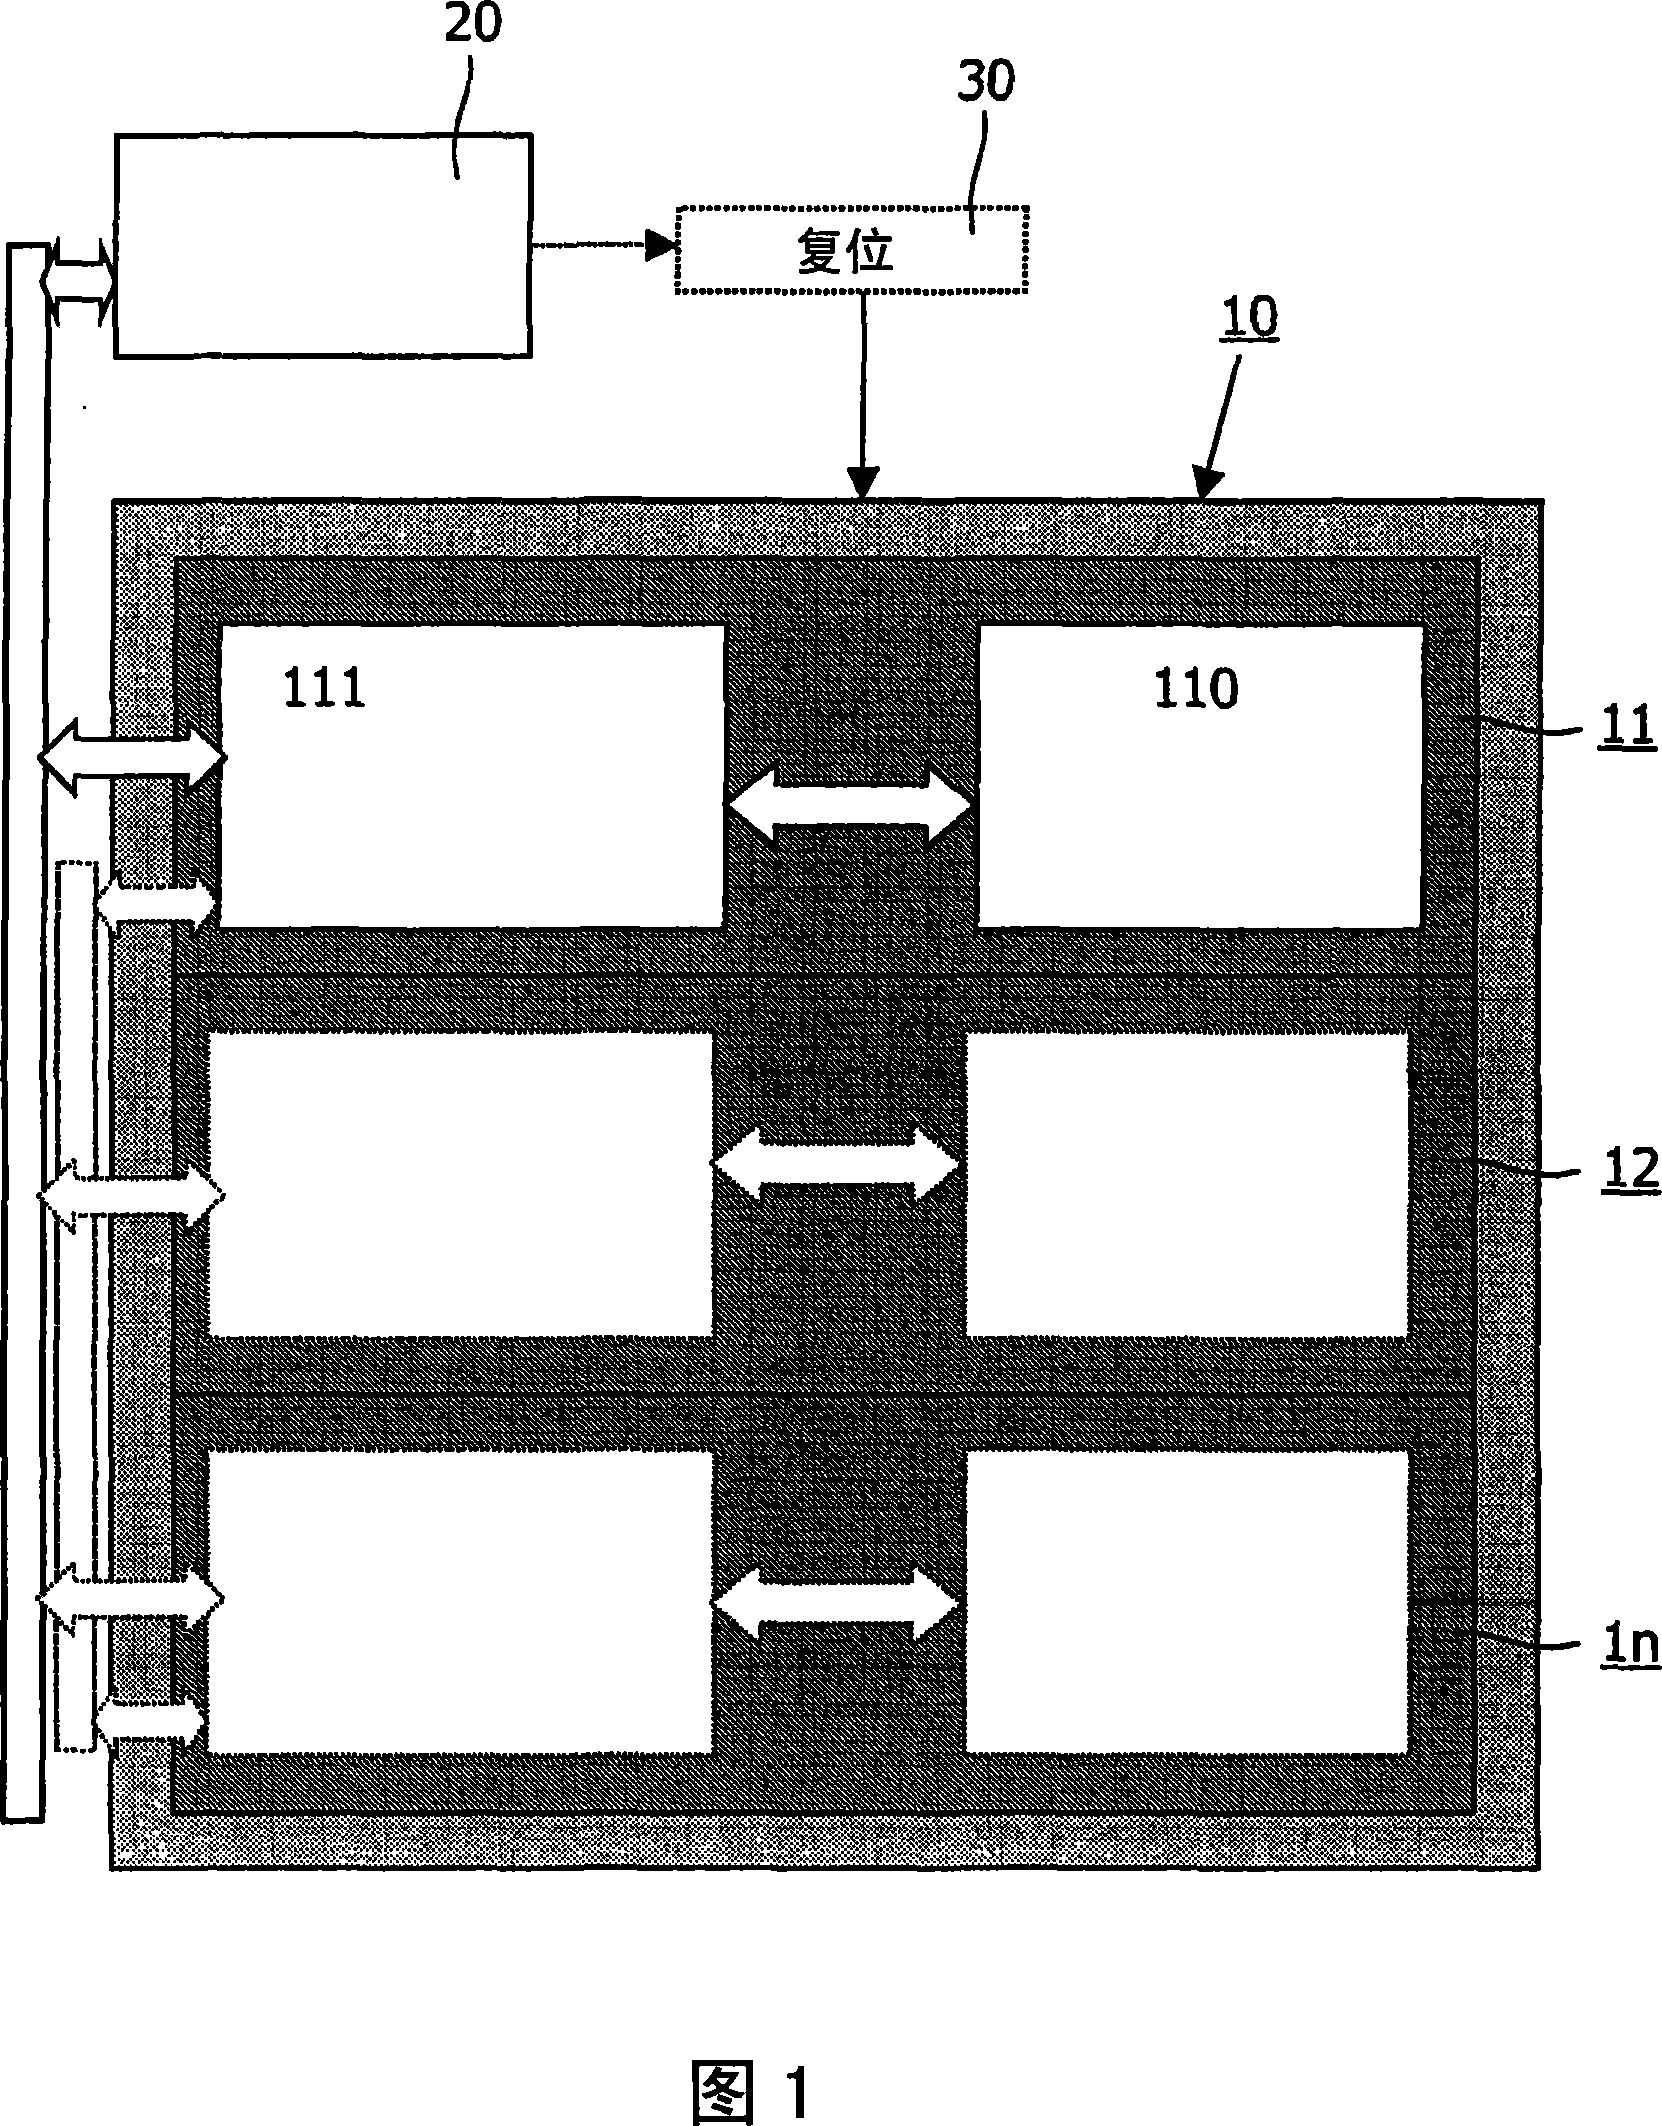 A testable multiprocessor system and a method for testing a processor system